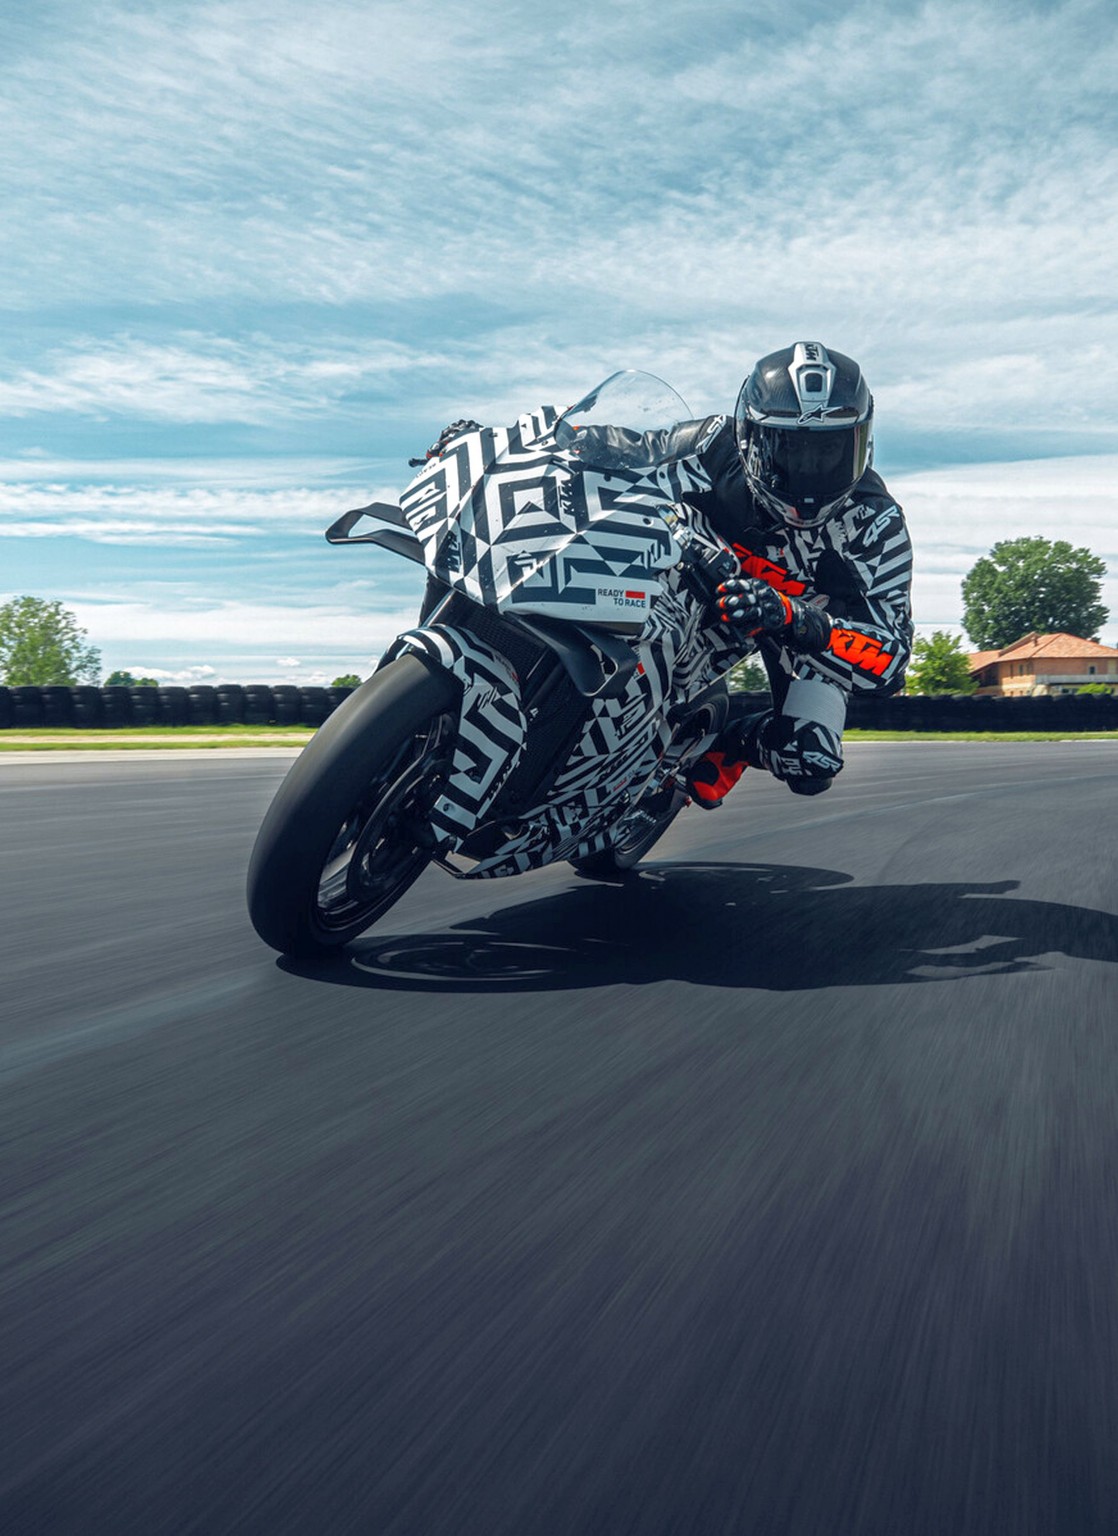 KTM 990 RC R - finally the thoroughbred sports bike for the road! - Image 23